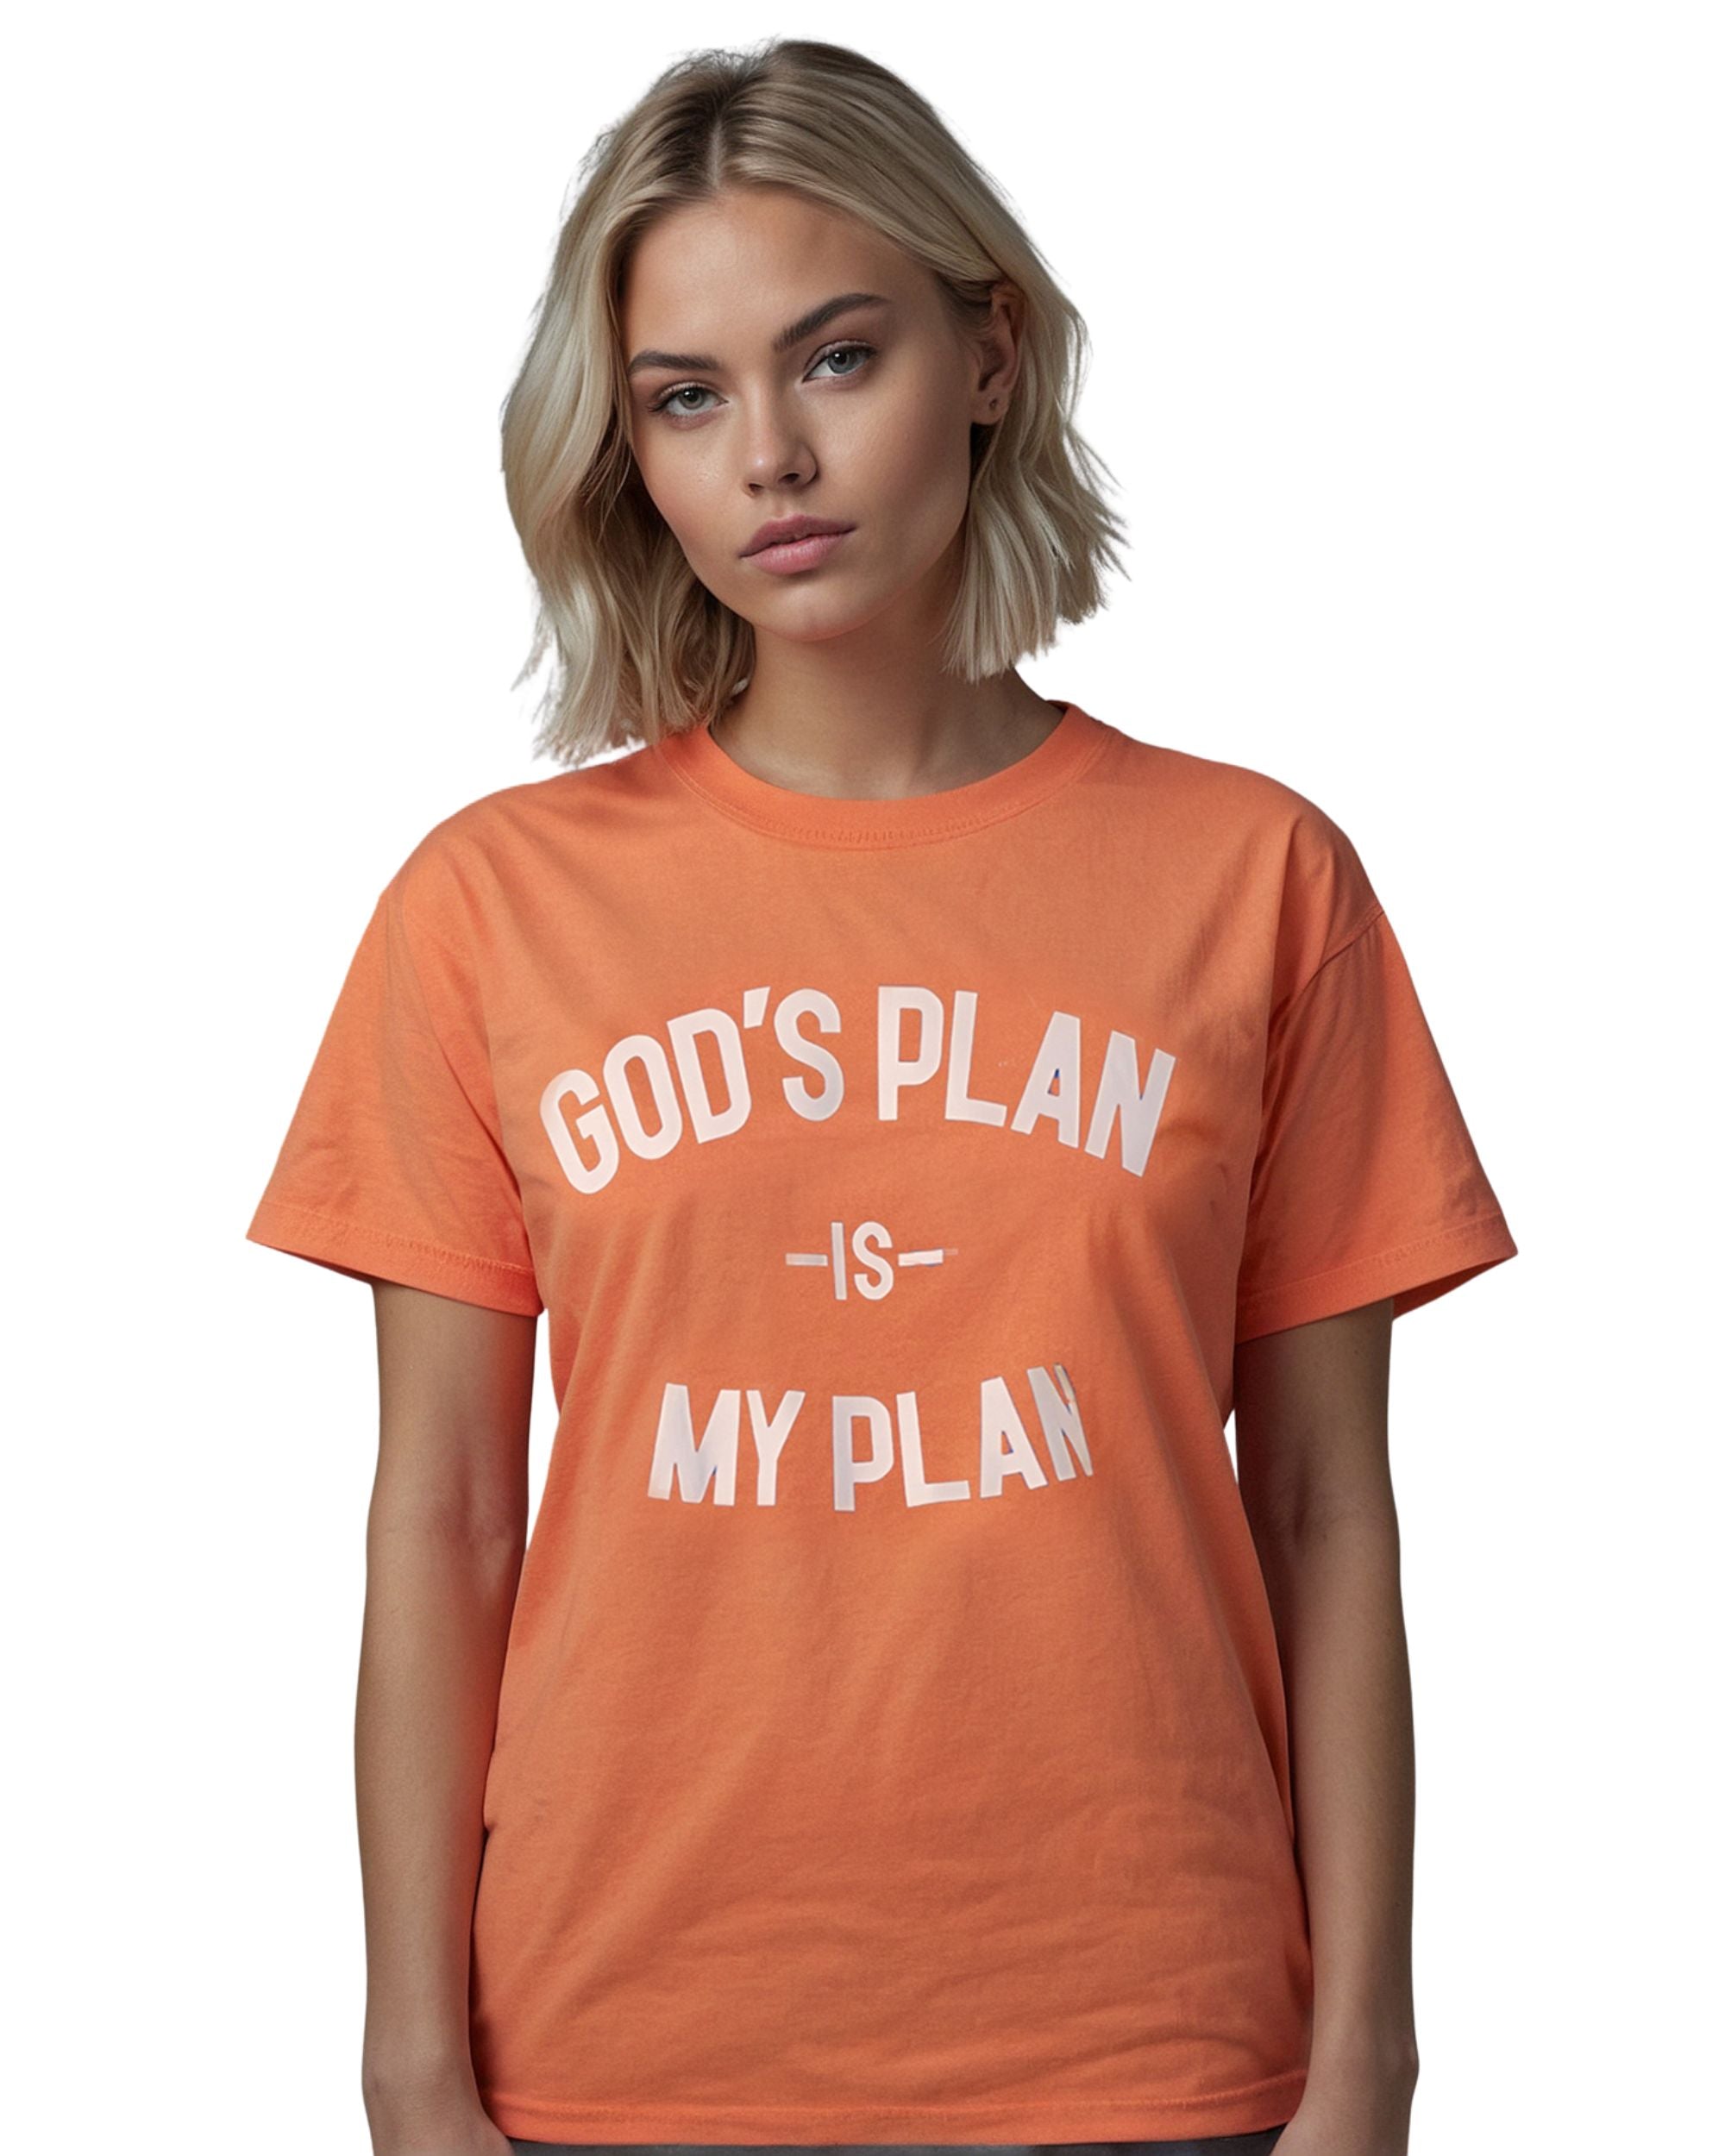 God's Plan My Plan Christian Tee, Used By God, Used By God Clothing, Christian Apparel, Christian T-Shirts, Christian Shirts, christian t shirts for women, Men's Christian T-Shirt, Christian Clothing, God Shirts, christian clothing t shirts, Christian Sweatshirts, womens christian t shirts, t-shirts about jesus, God Clothing, Jesus Hoodie, Jesus Clothes, God Is Dope, Art Of Homage, Red Letter Clothing, Elevated Faith, Beacon Threads, God The Father Apparel